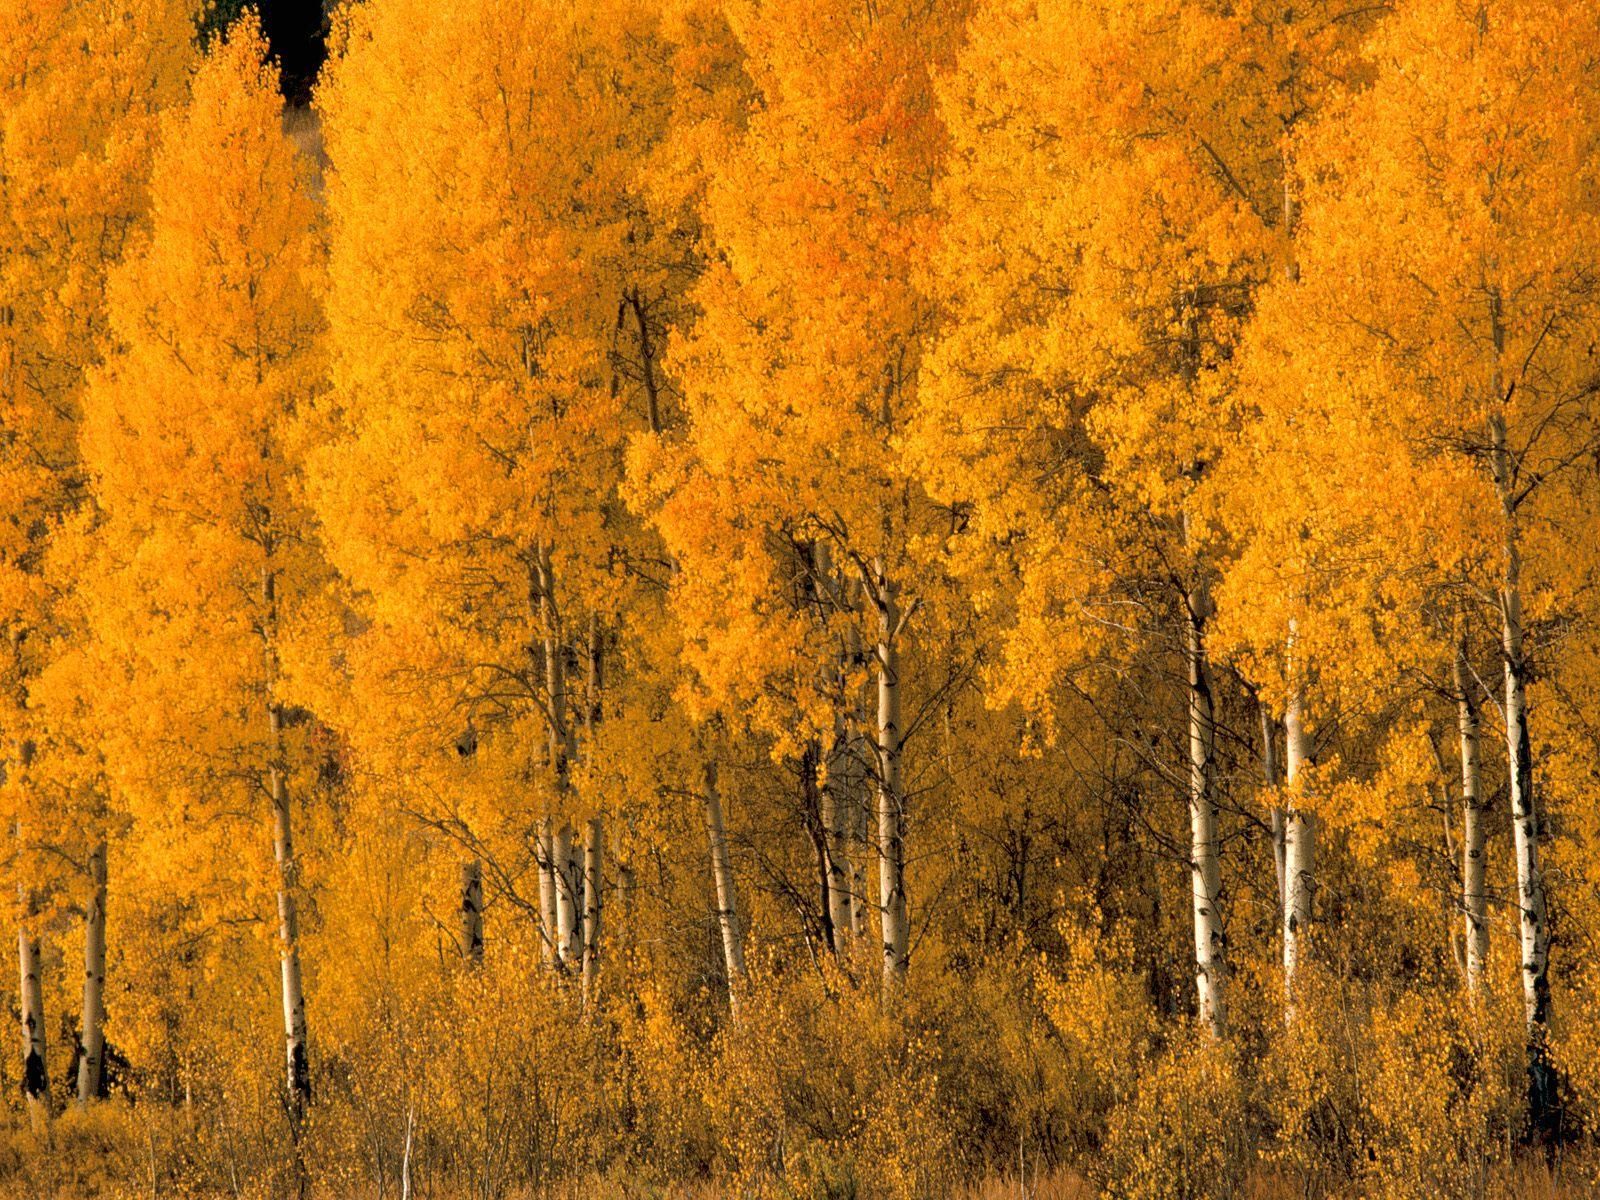 cool natural yellow forest image